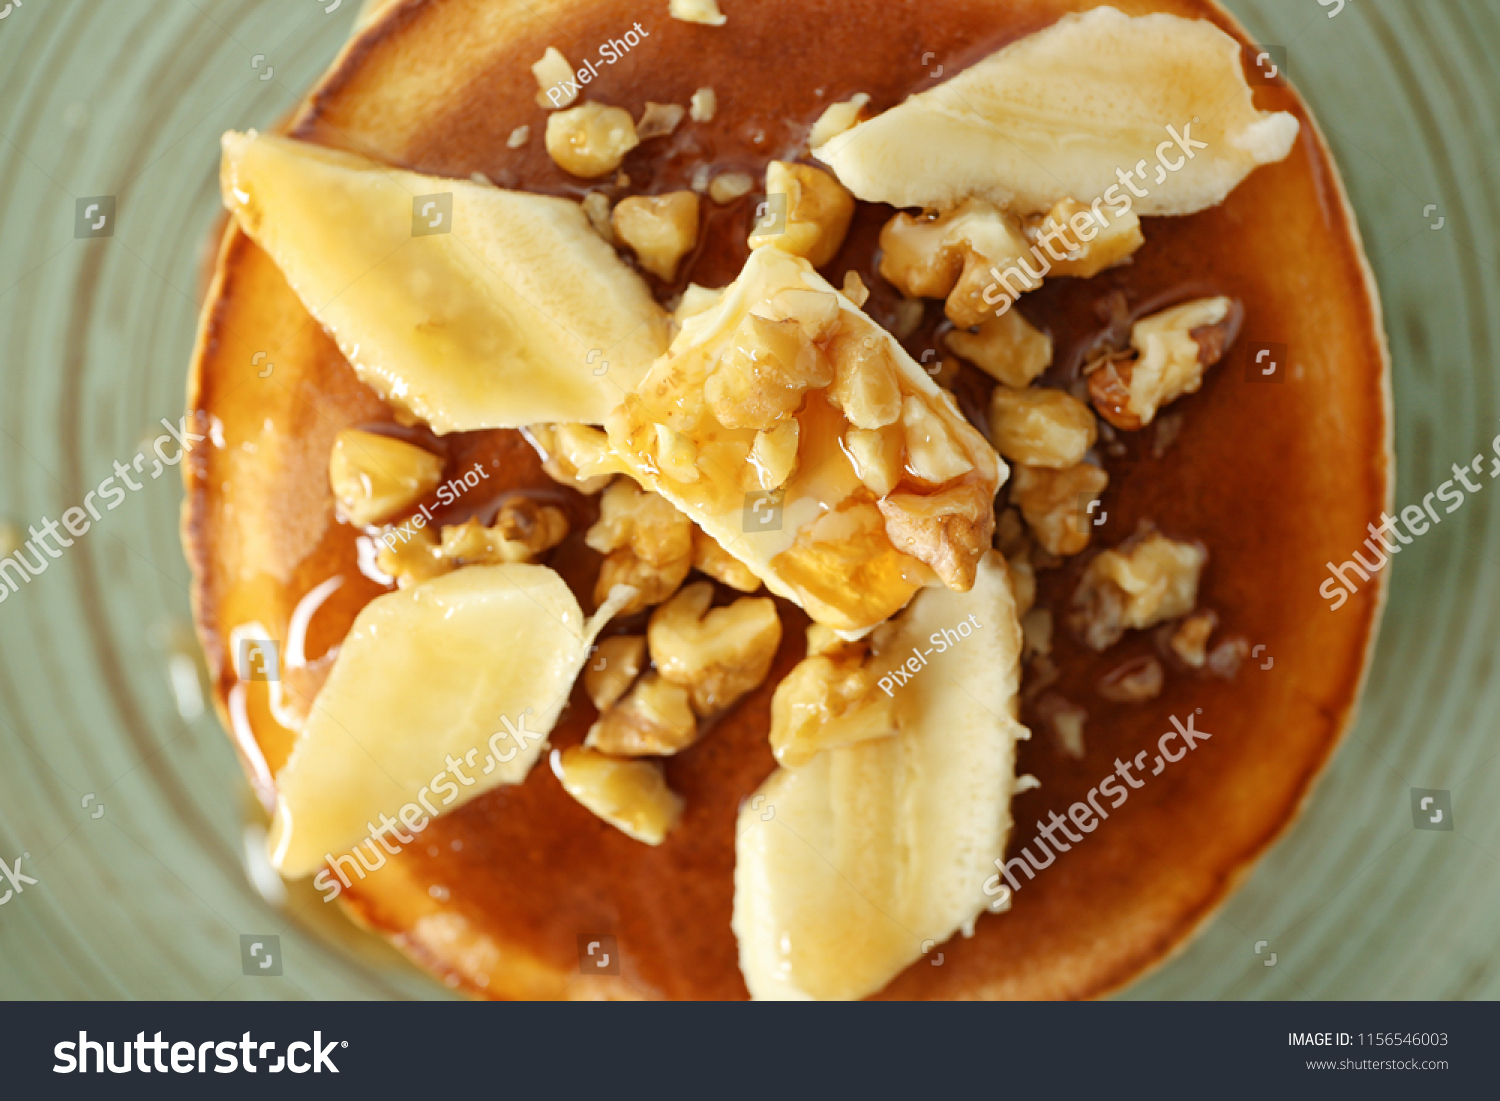 Tasty pancakes with sliced banana and walnuts on plate, closeup #1156546003